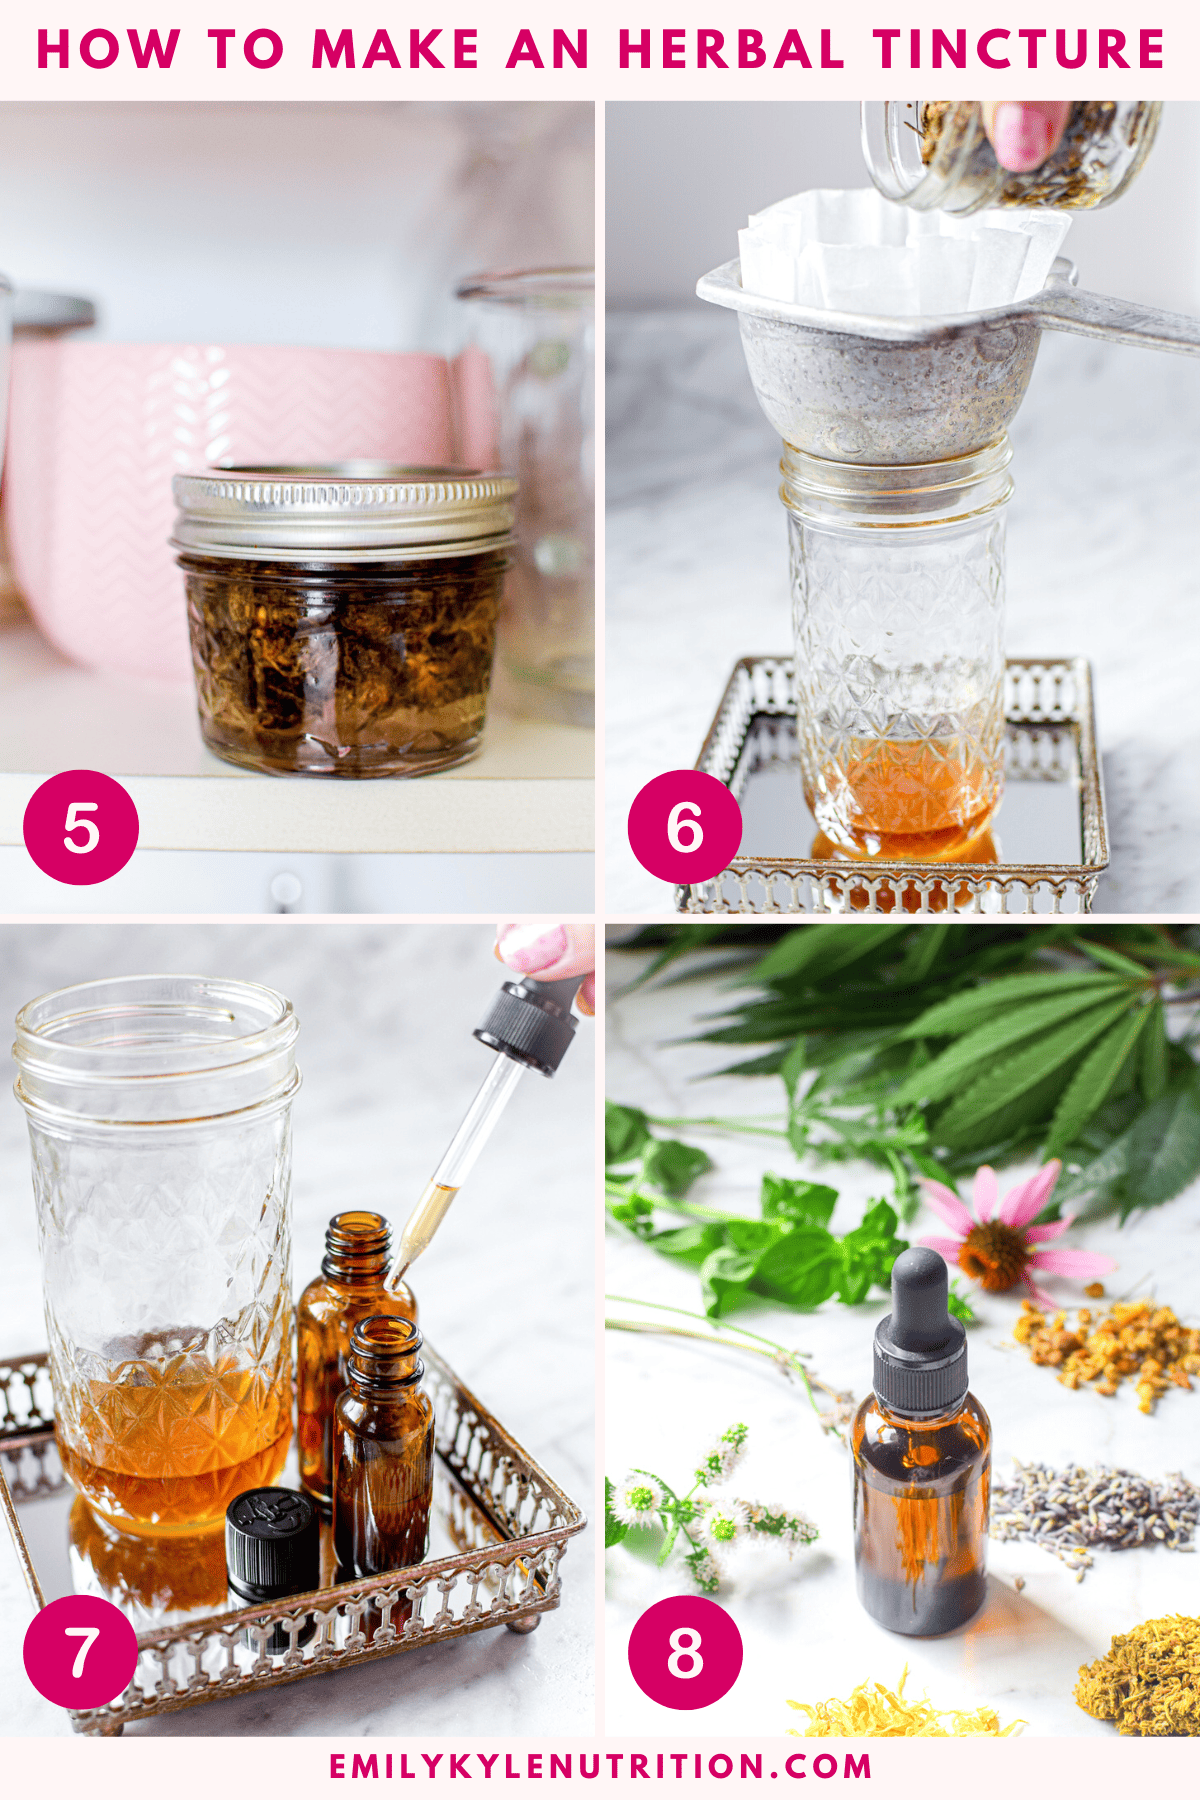 A four step image collage showing how to make an herbal tincture.